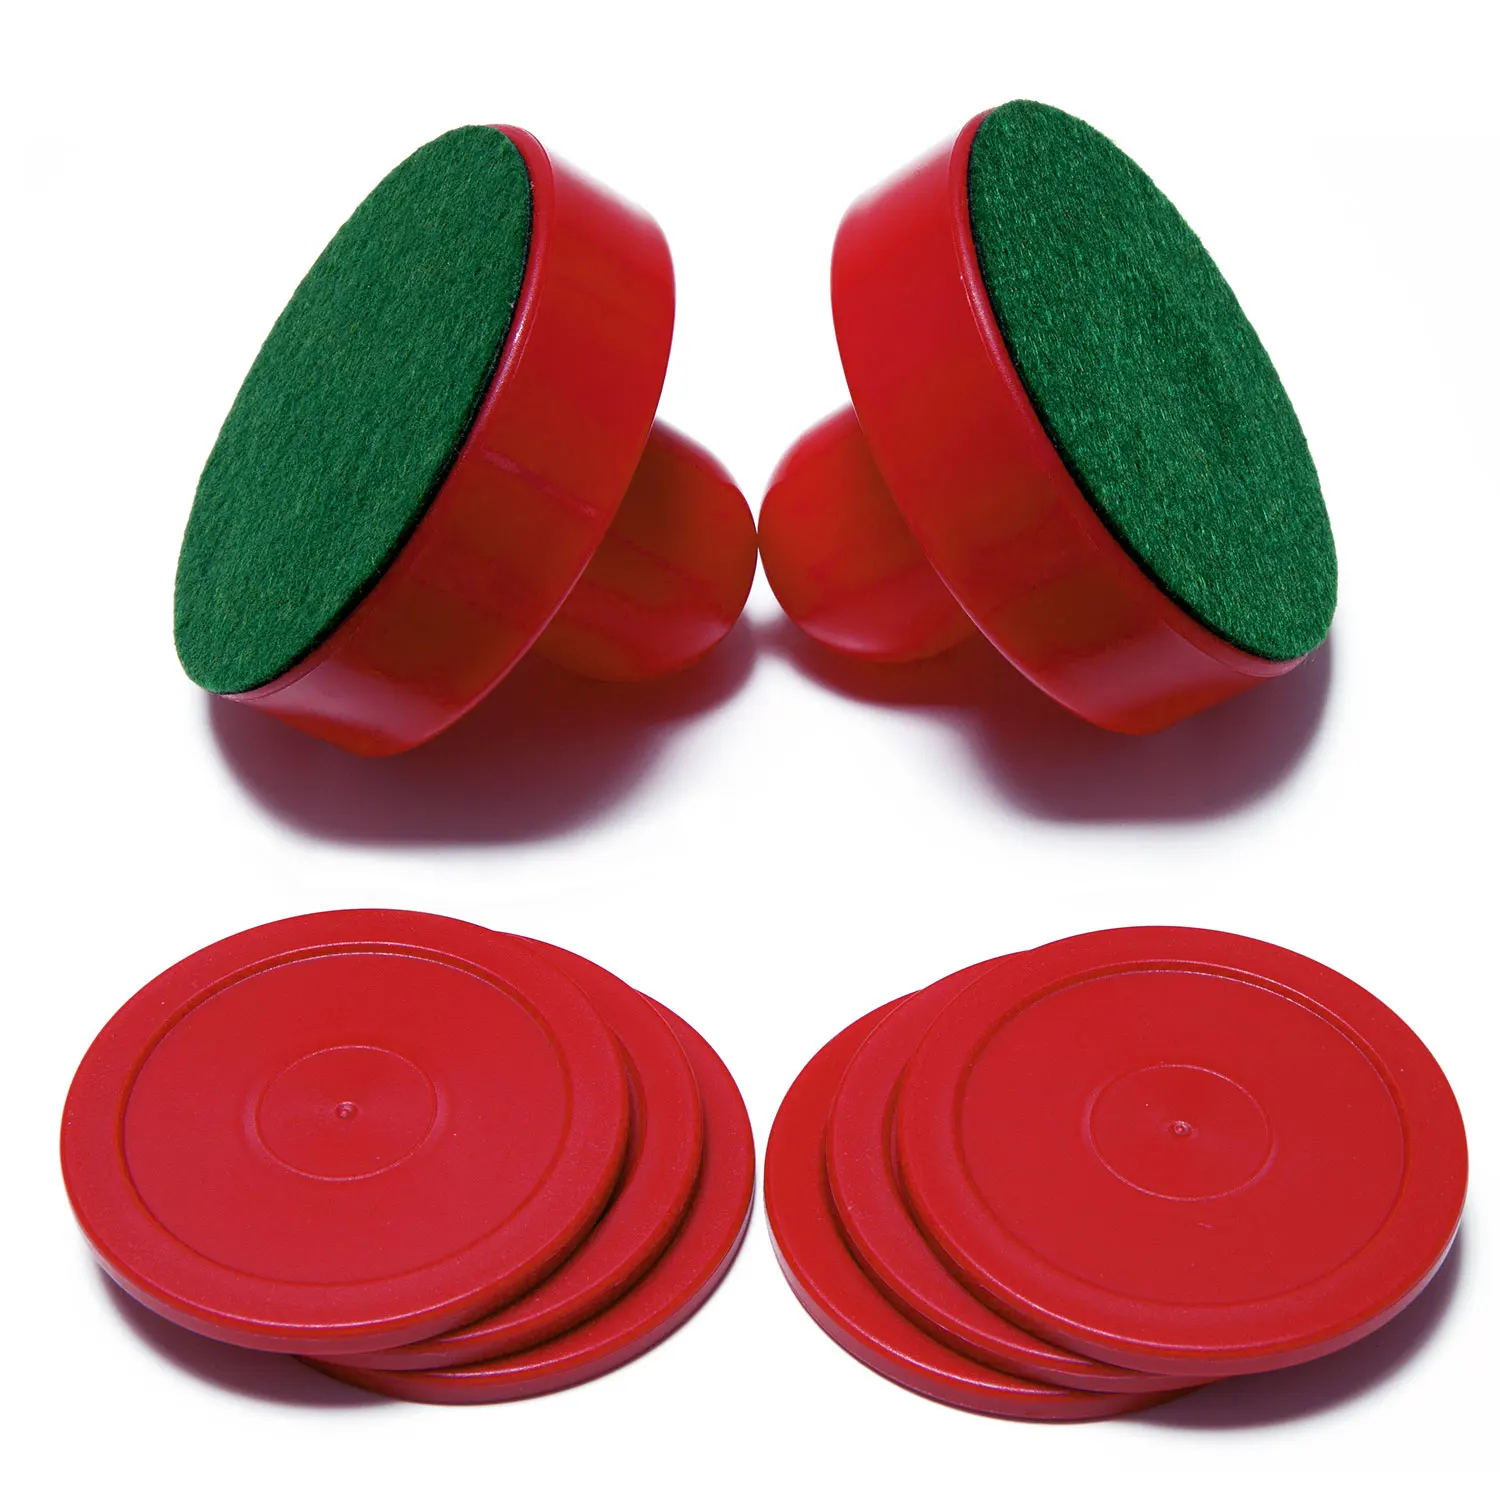 2 Sets of Ice Hockey Replacement Pucks Paddles Slider Pushers with